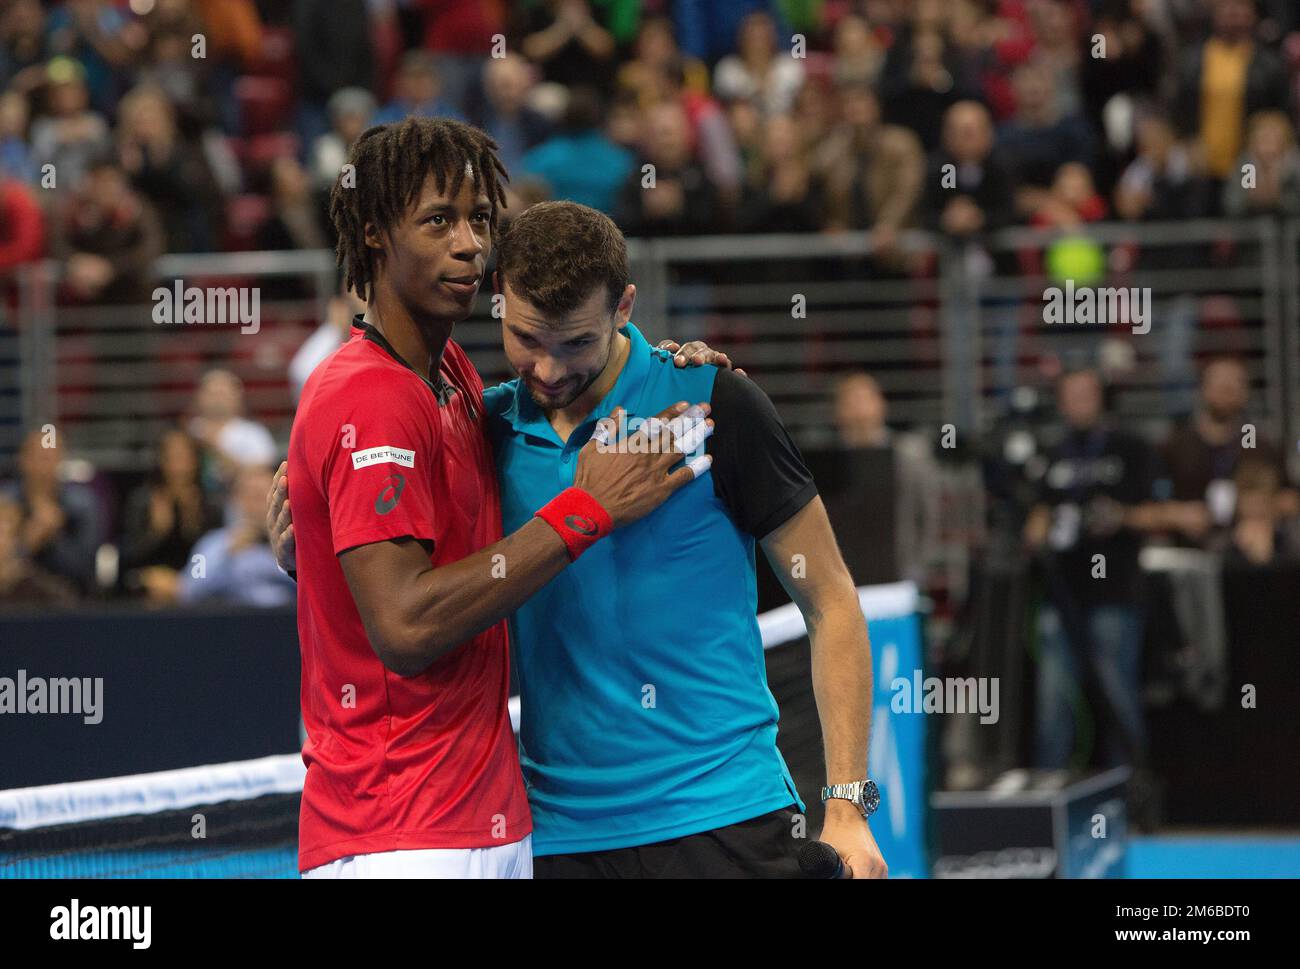 Grigor Dimitrov defeated Monfils in a demonstrative match in Arena Armeec hall, Sofia Stock Photo